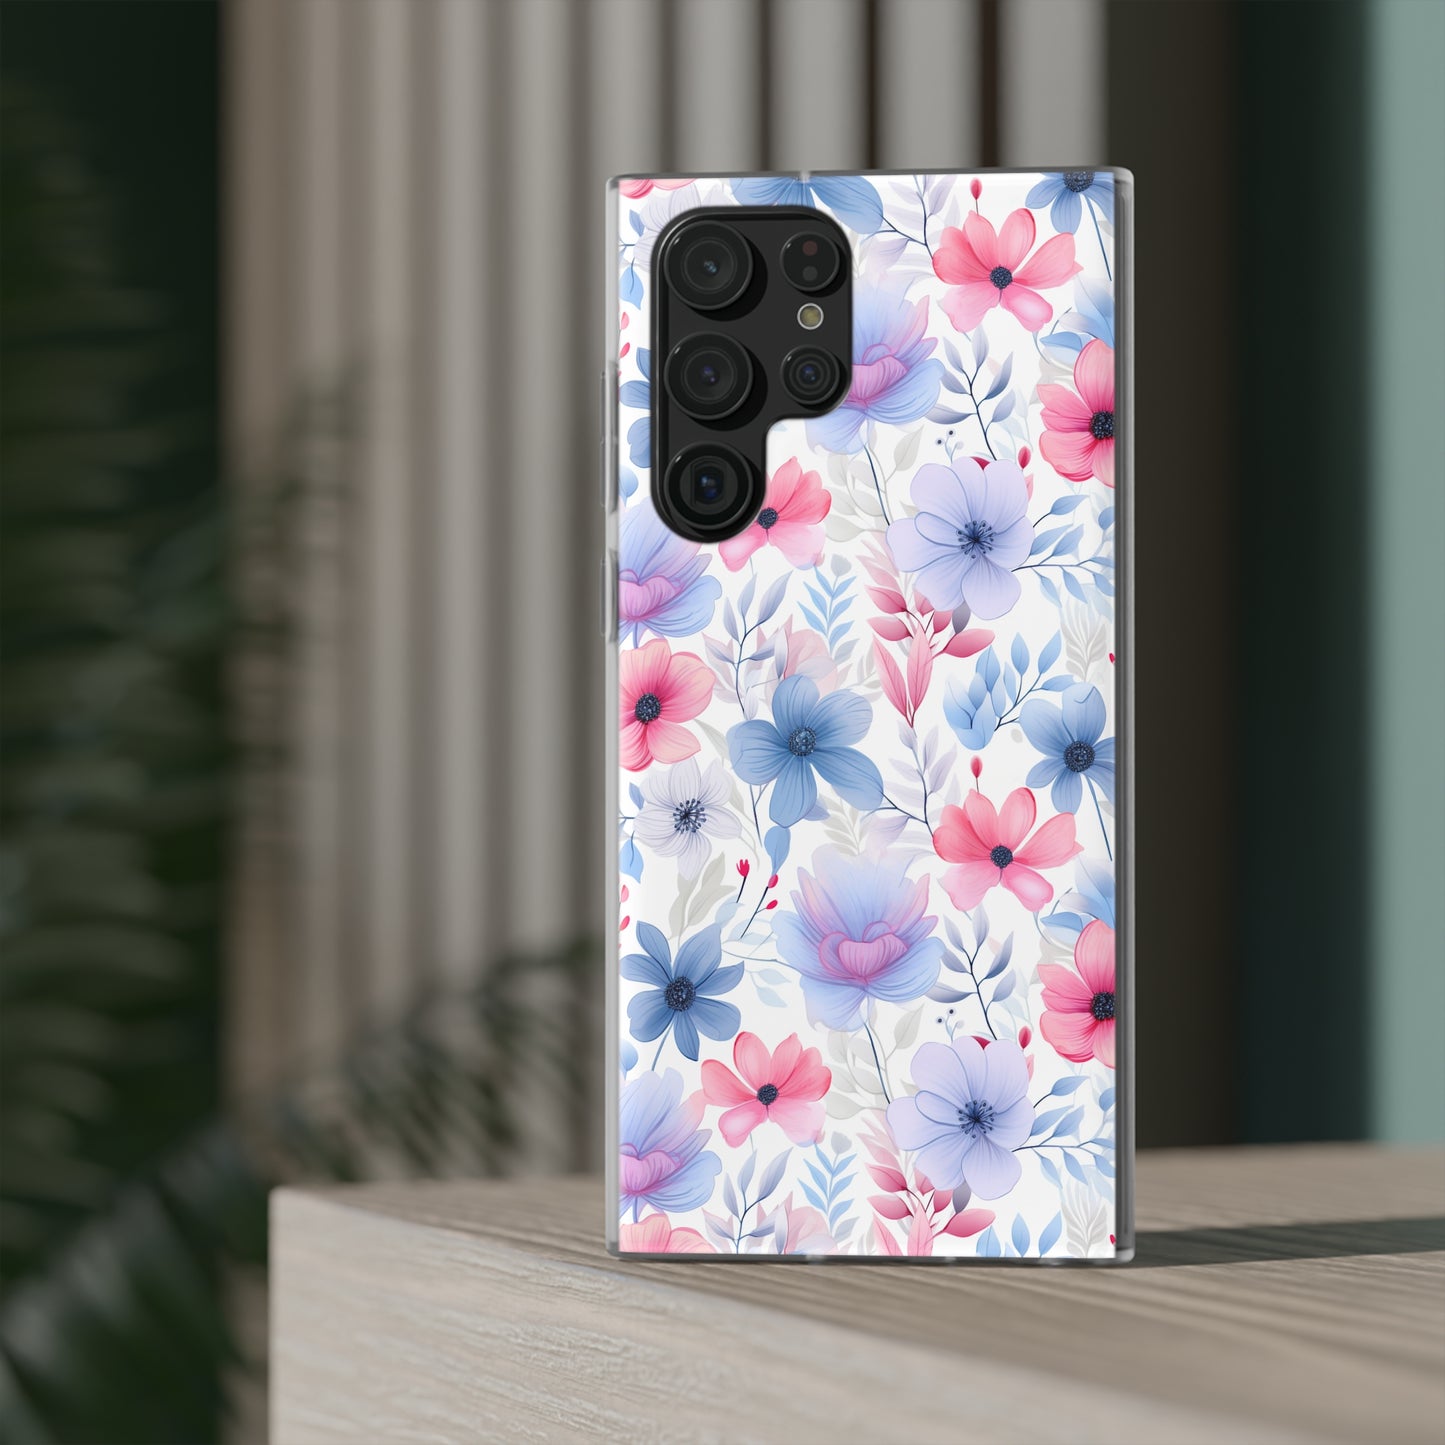 Floral Whispers - Soft Hues of Violets, Pinks, and Blues - Flexi Phone Case Phone Case Pattern Symphony Samsung Galaxy S22 Ultra  